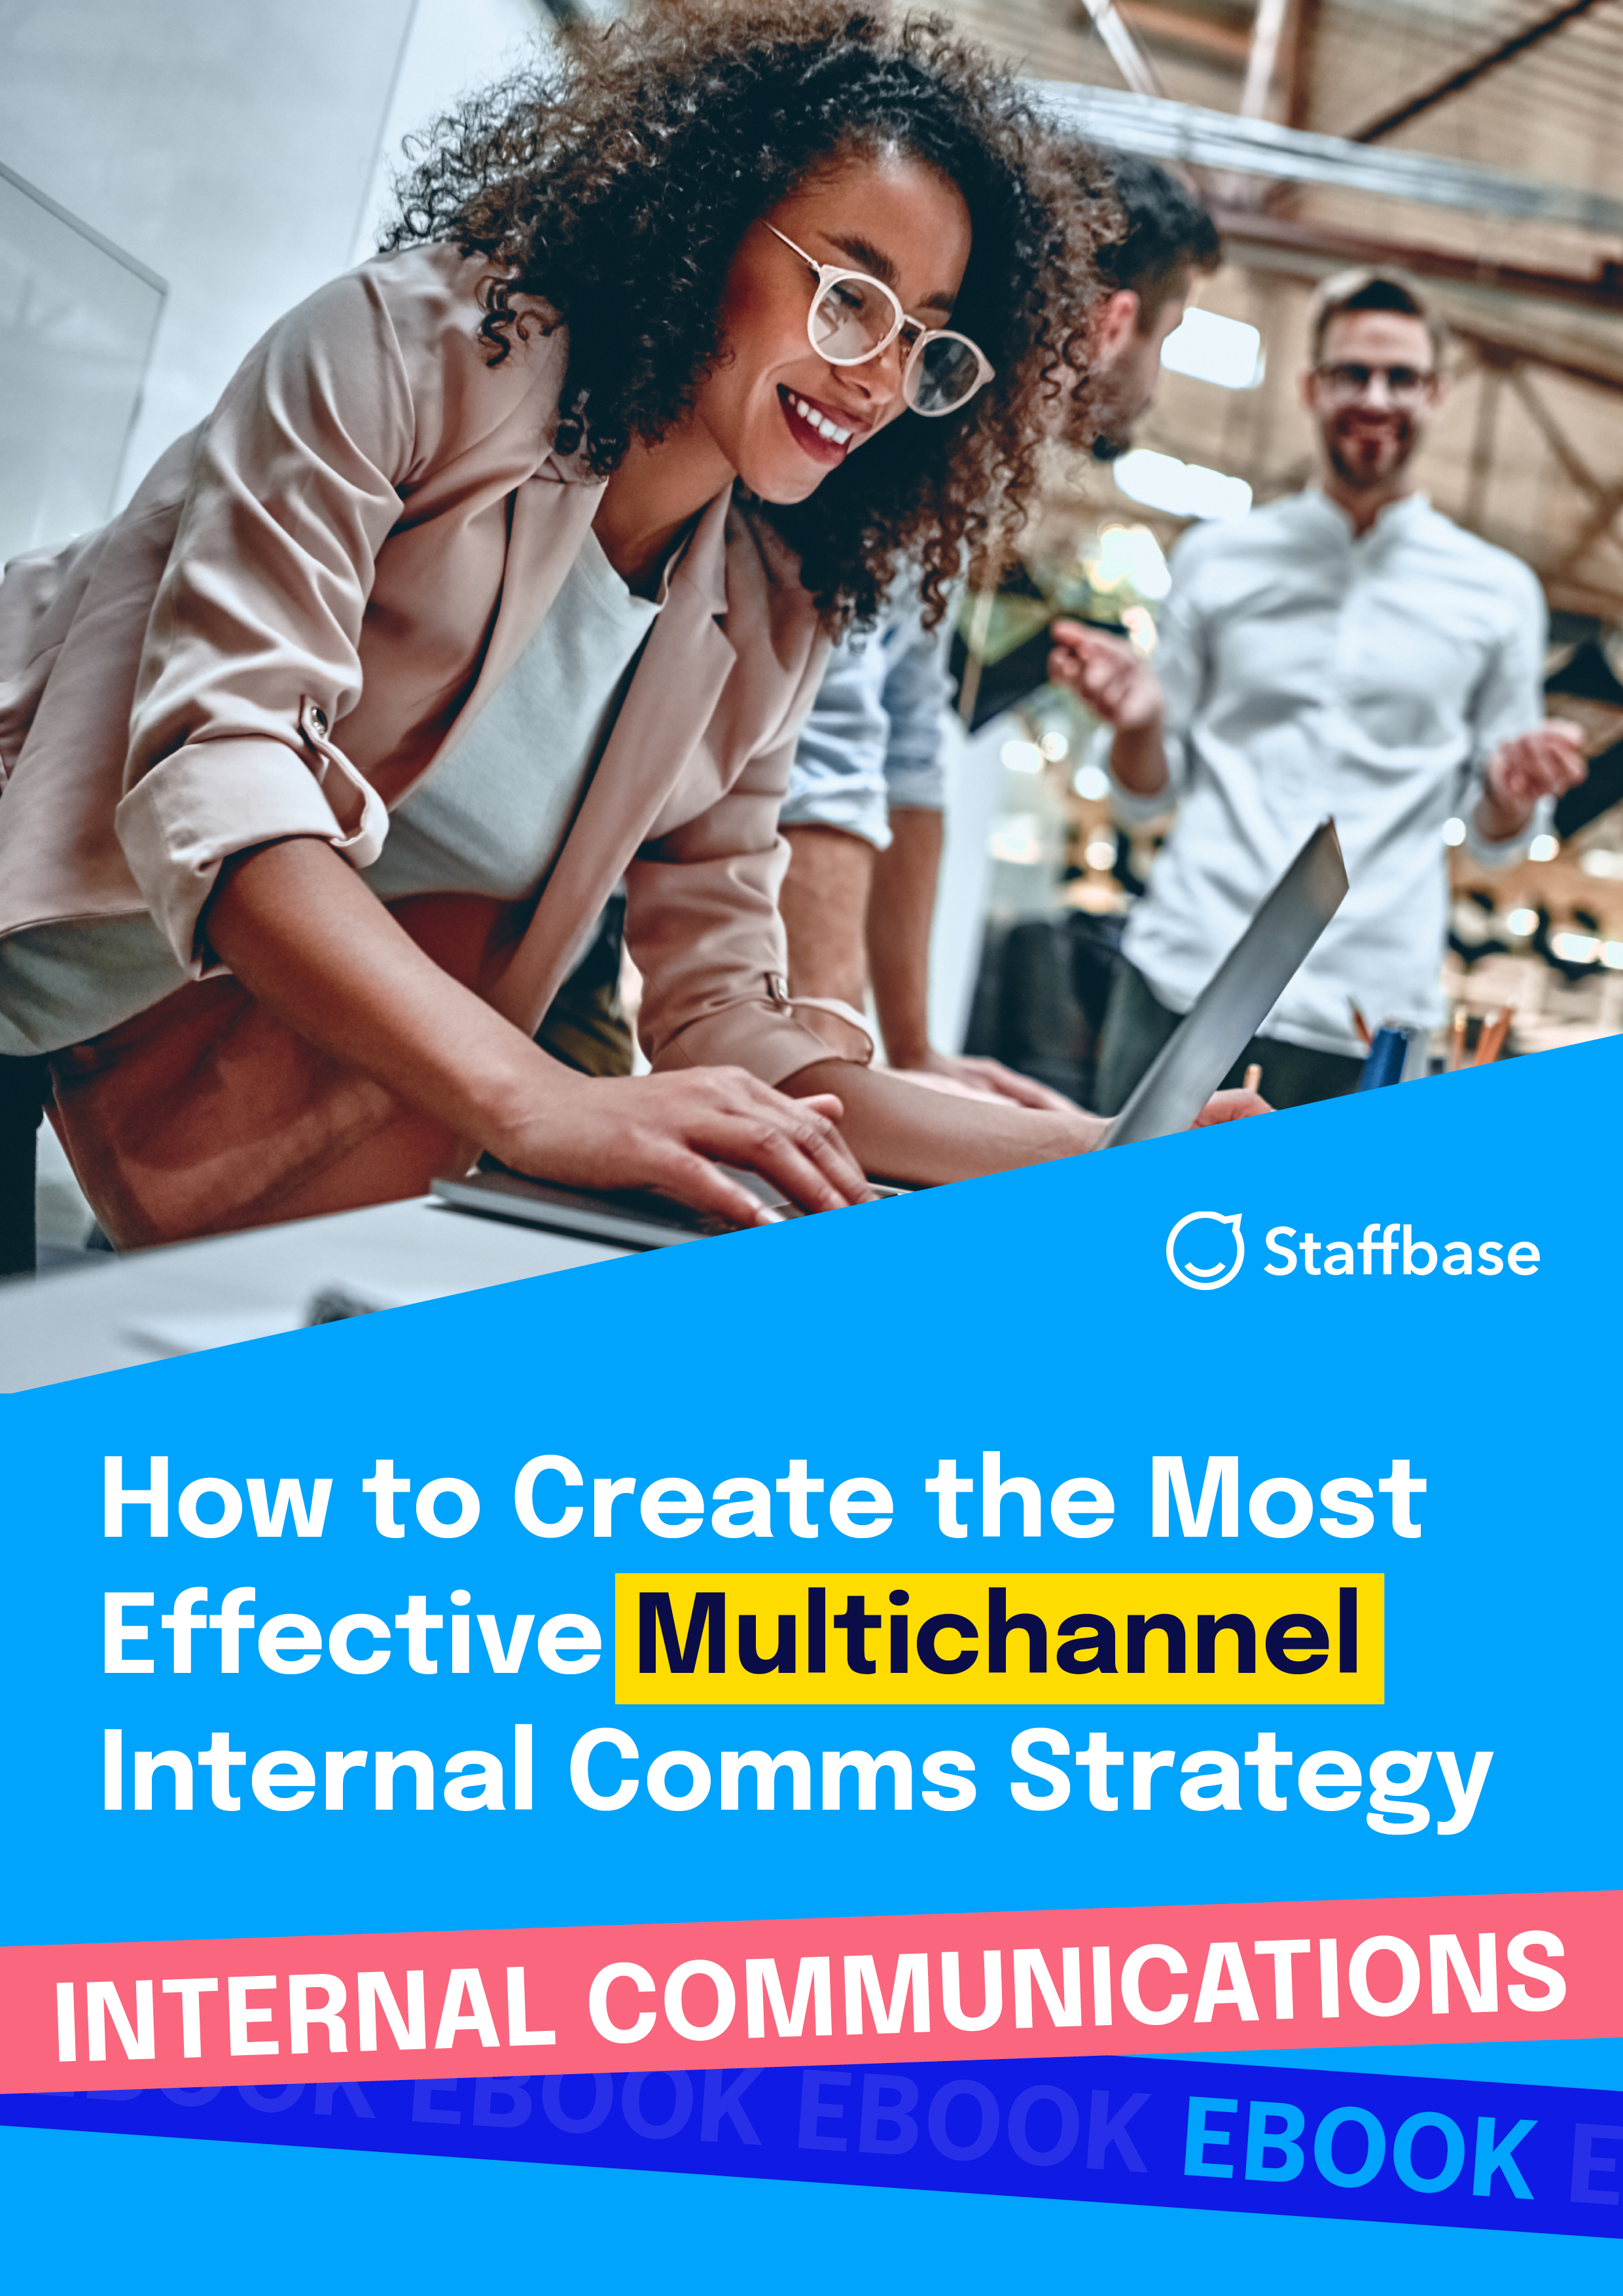 Create an Effective Multichannel Strategy for your Internal Communications